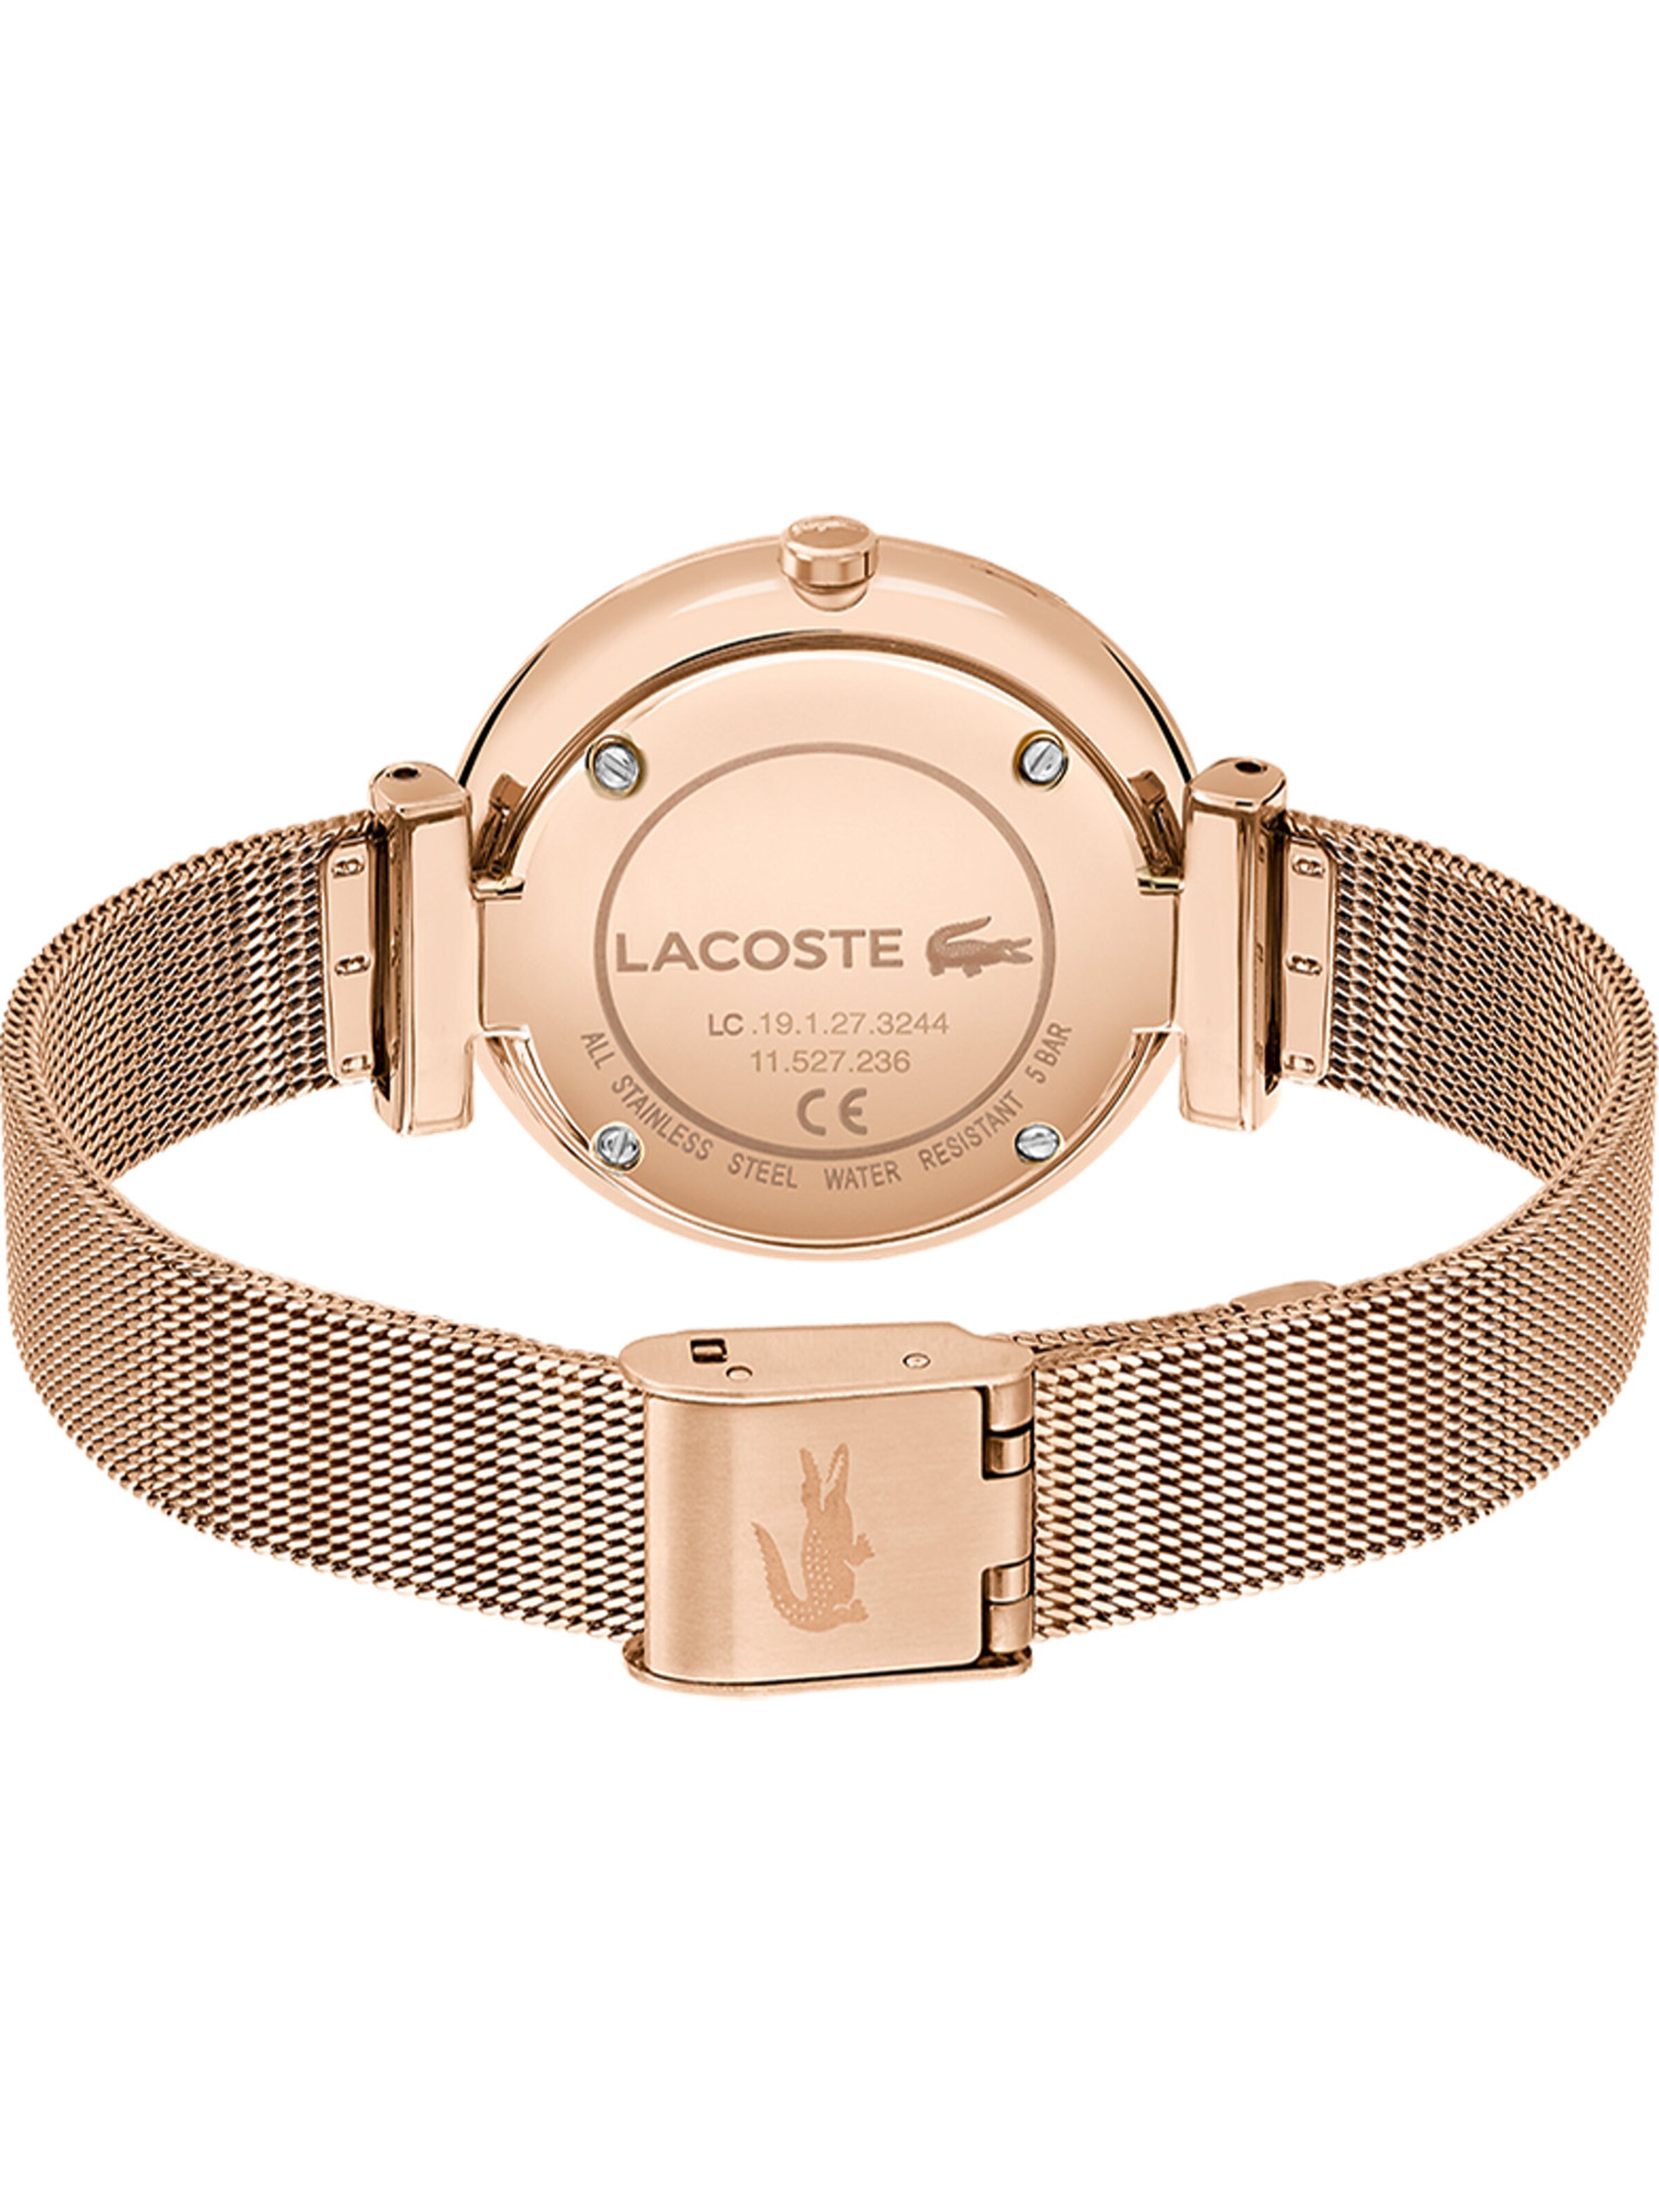 LACOSTE Uhr in Rosegold 